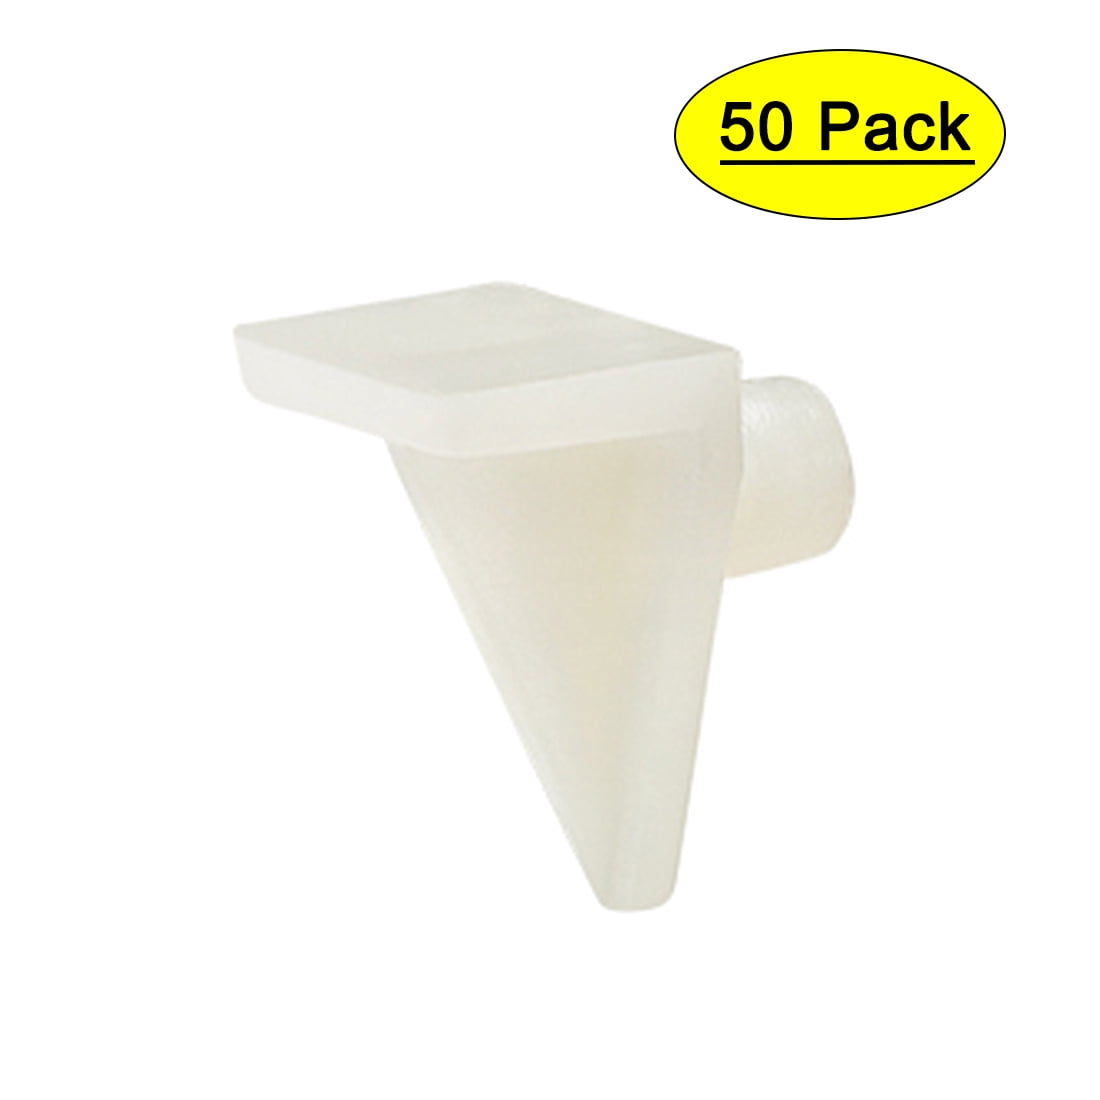 5MM SHELF SUPPORTS WHITE PLASTIC PUSH IN 3B4-100 ITEMS